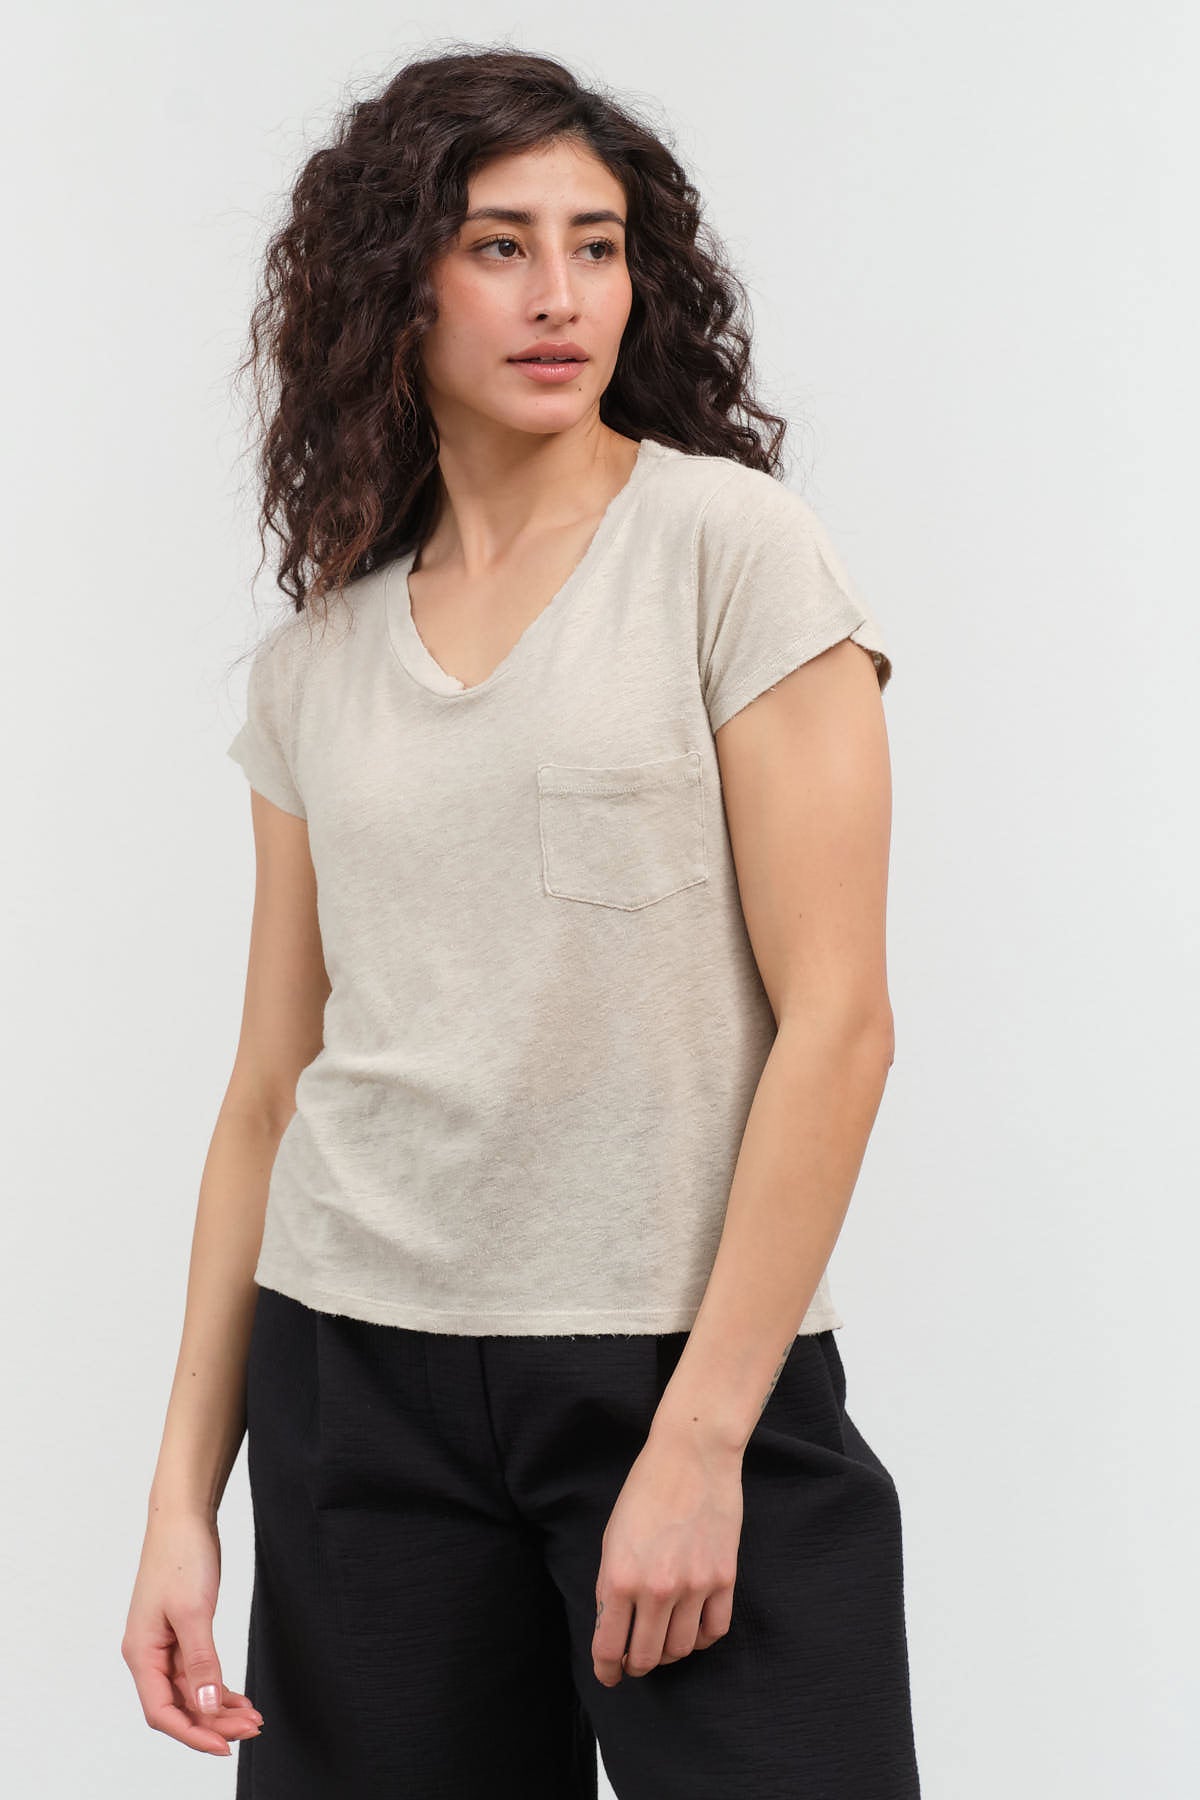 Styled view of Sweetness V-Neck Tee in Pumice